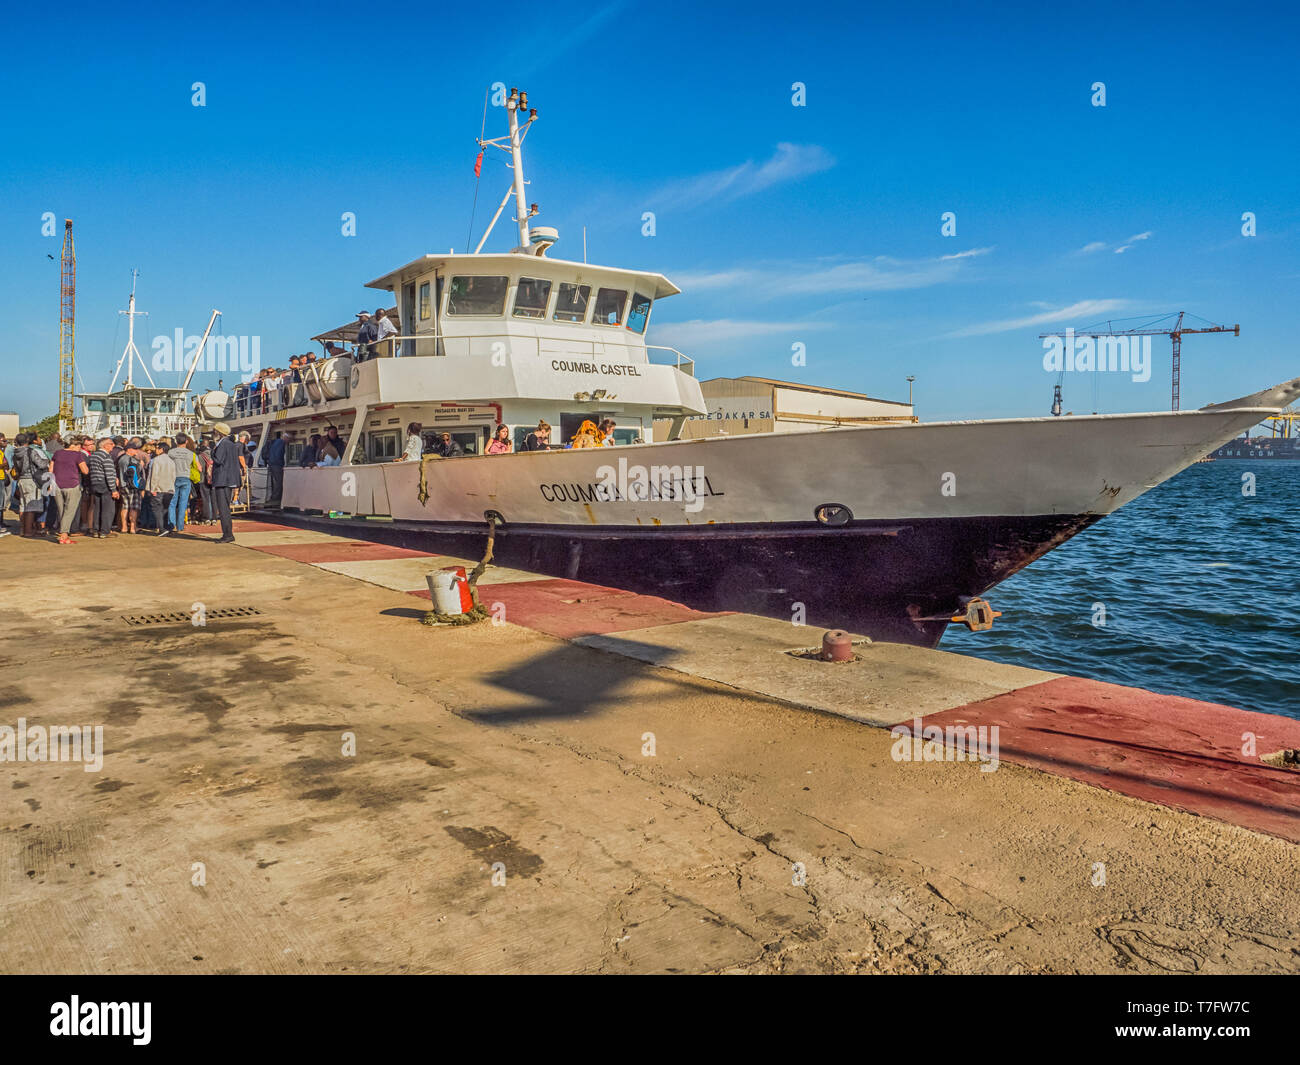 Dakar, Senegal - February 2, 2019: People waiting for the boat transporting people from Dakar to Goree island in port in Dakar. Gorée. Dakar, Senegal. Stock Photo